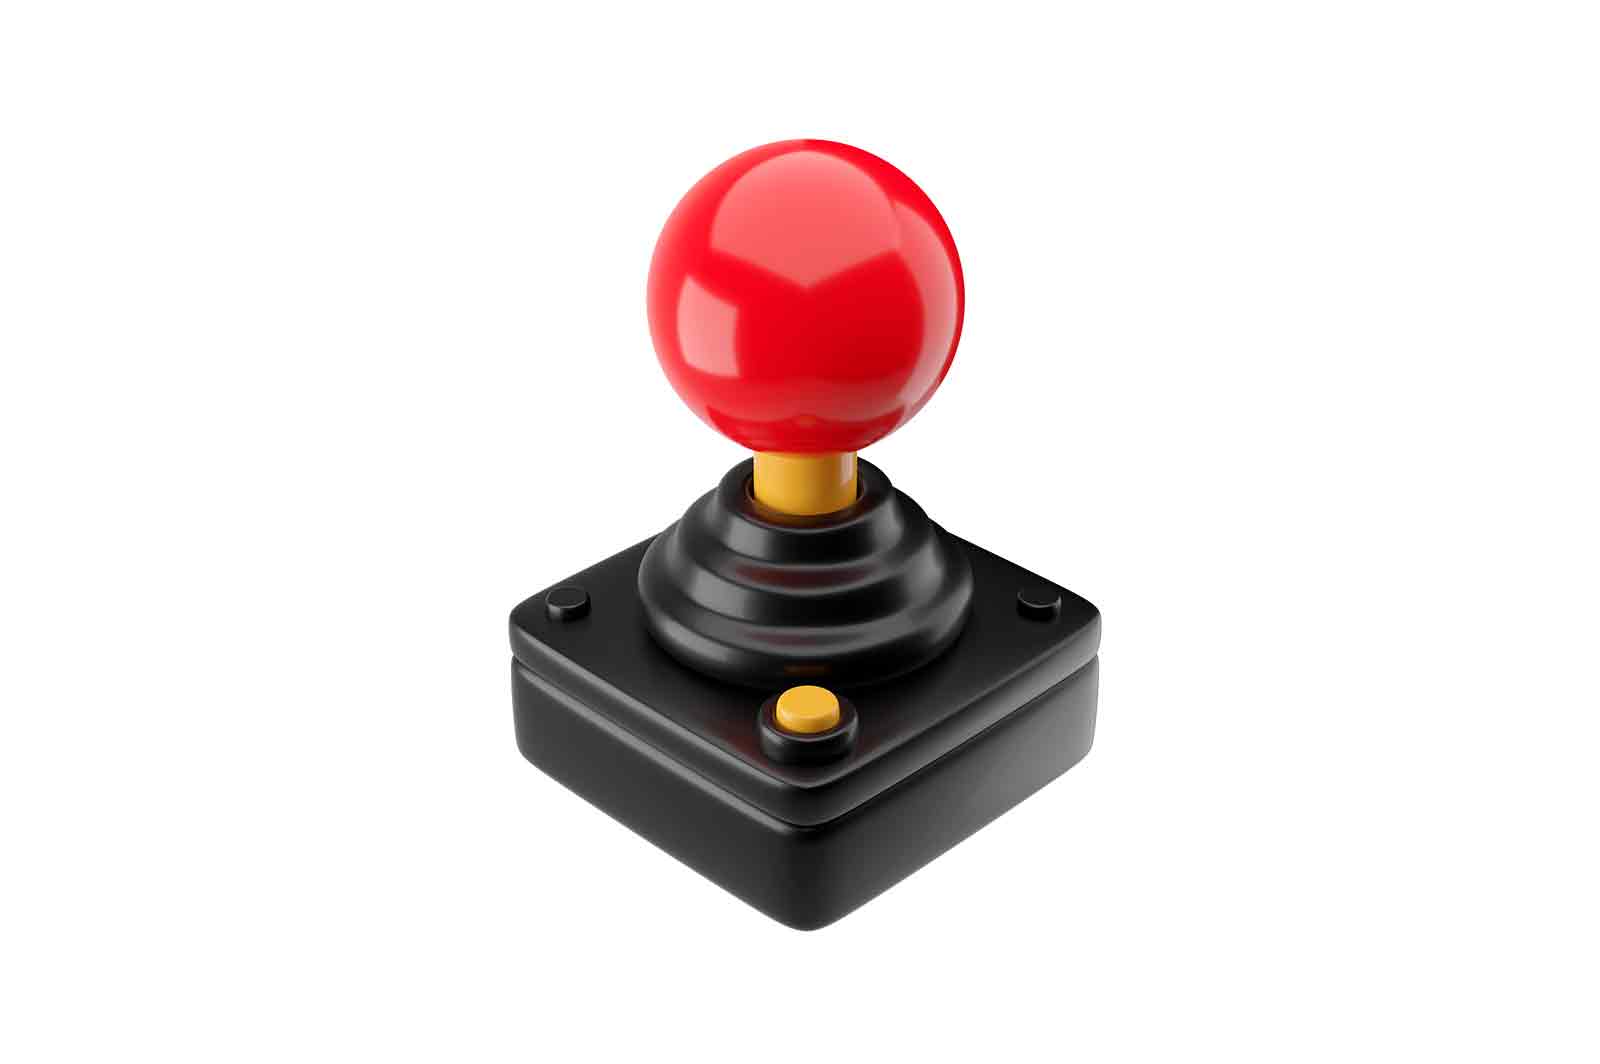 Joystick, 3d rendered illustration, with red ball on black stick and yellow button on black base. Isolated on white background, realistic look.